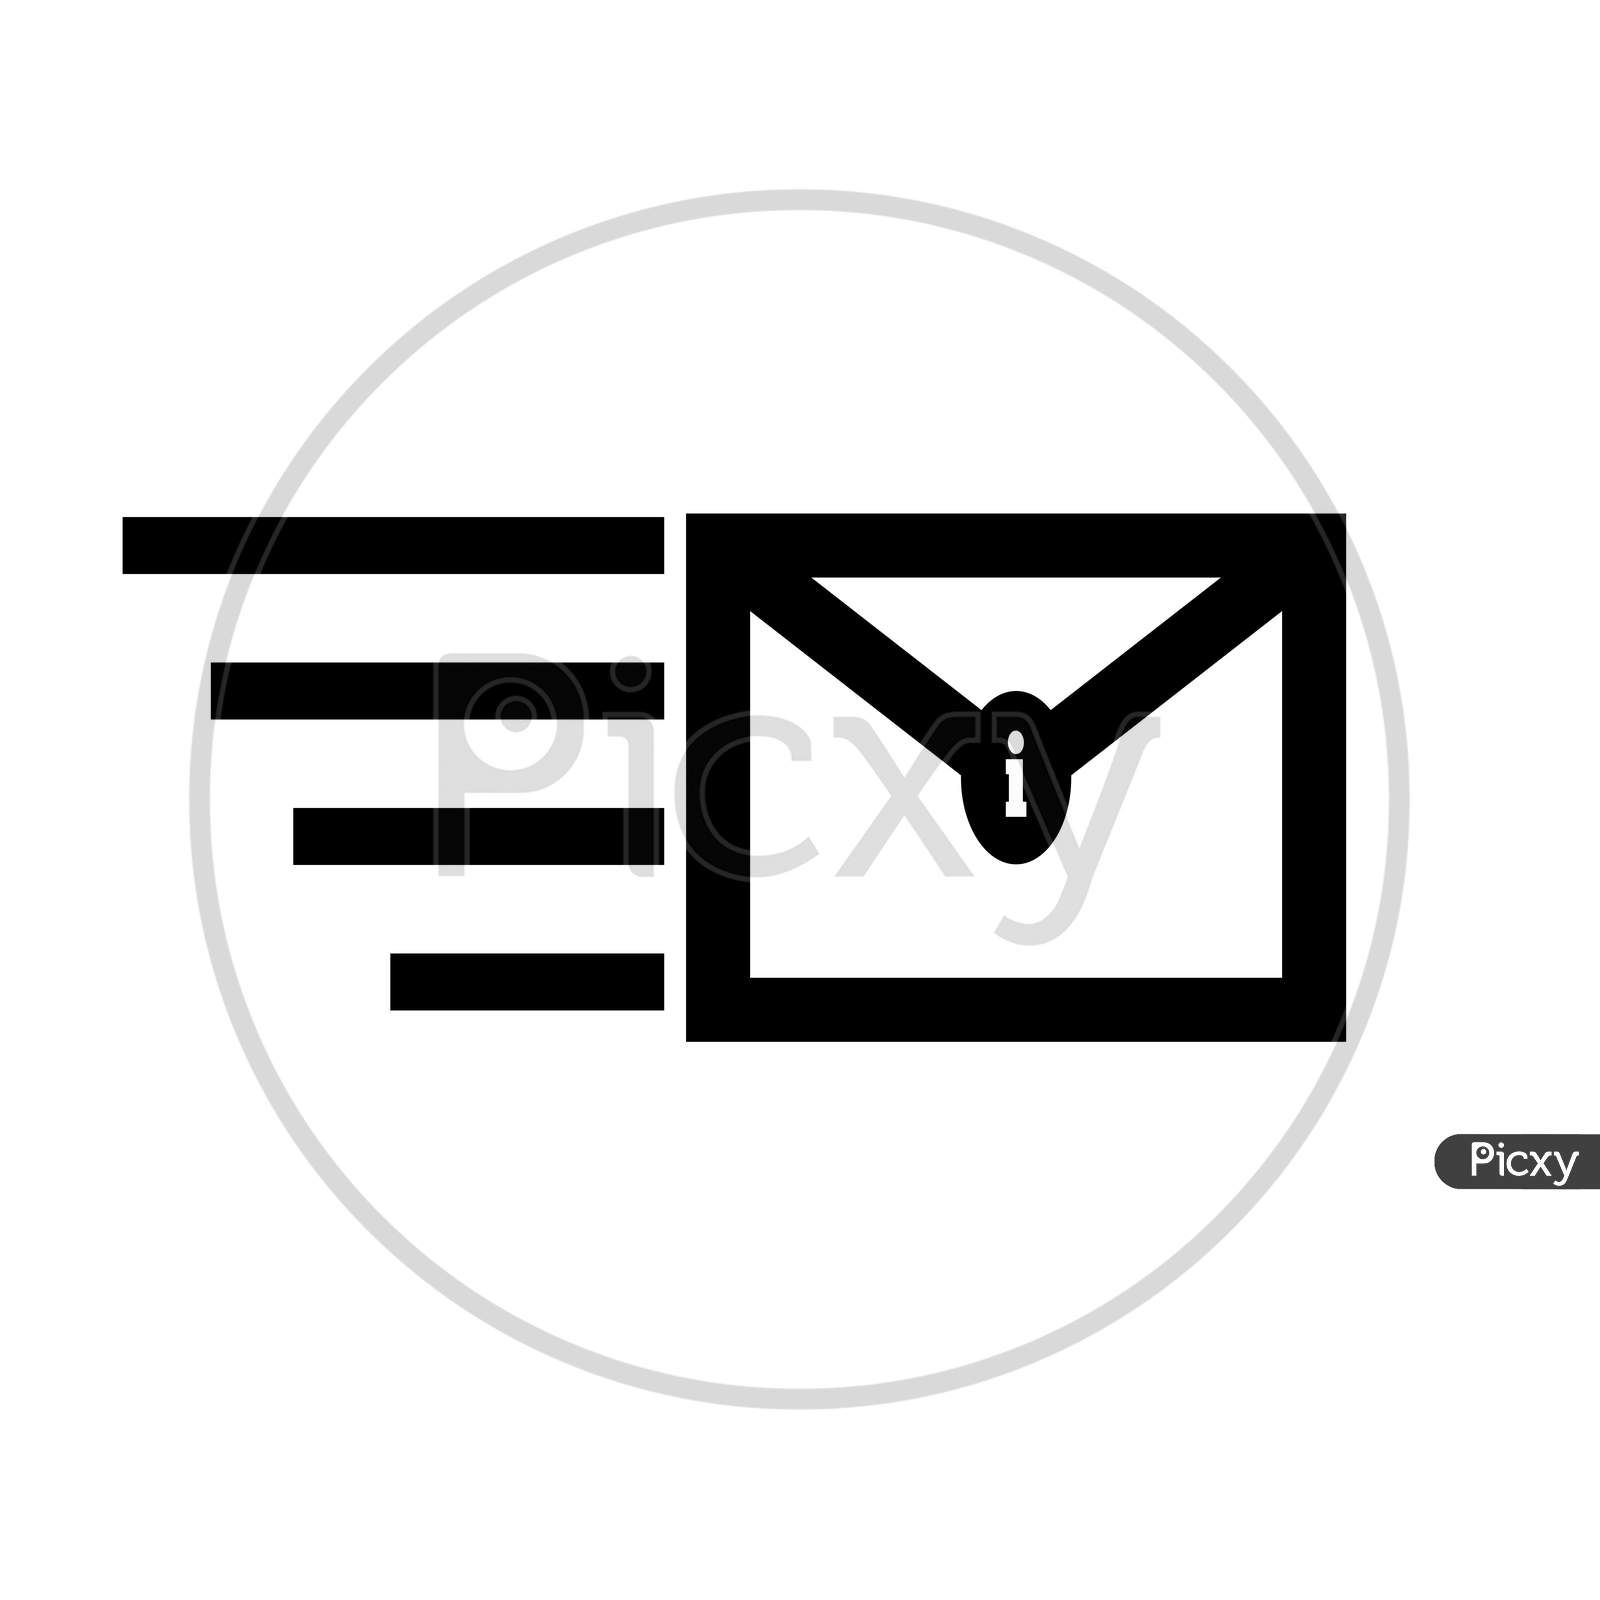 Mail Icon. Concept Of Fast Internet Mail. Text Message Vector Icon, Speech Bubble Symbol. Modern, Simple Flat Vector Illustration For Web Site Or Mobile App